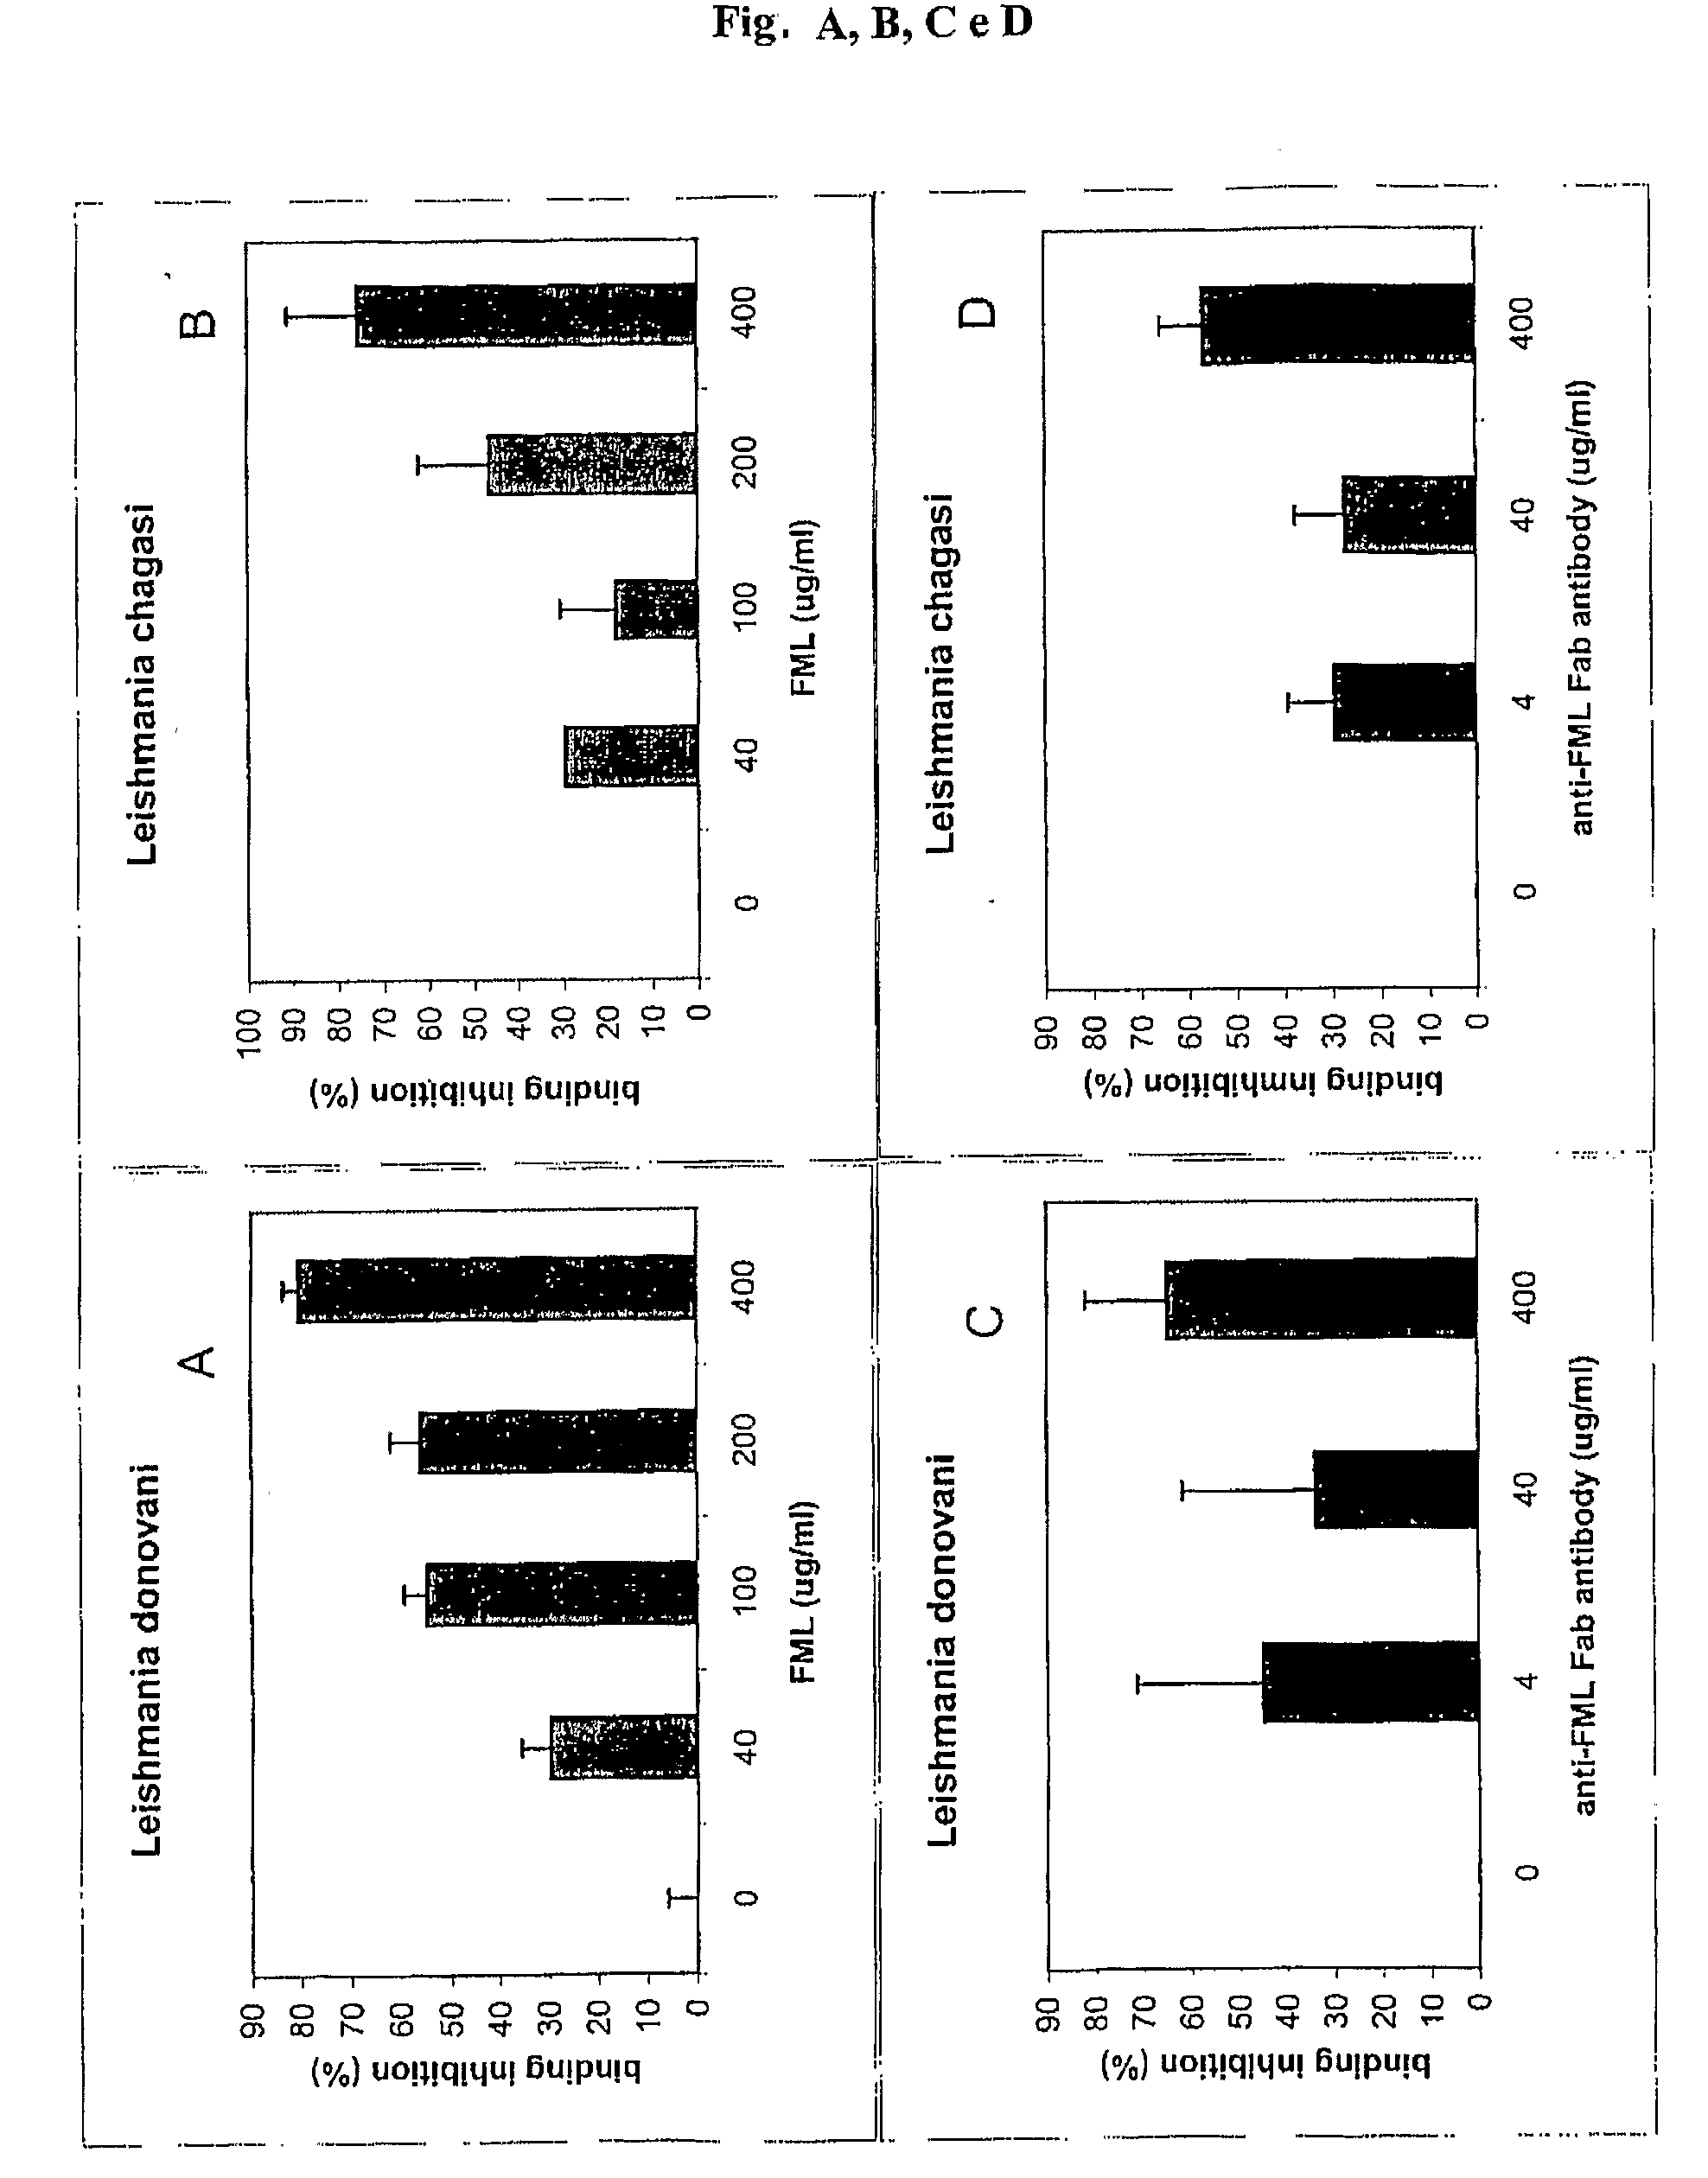 Composition comprising fractions or sub-fraction of leishmania promastigotes or leishmania amastigotes called fucose mannose ligand (fml) and saponin, composition for preparation of leishmaniasis transmission blocking vaccines in humans and animals comprising fractions or sub-fractions of leishmania promastigotes or leis